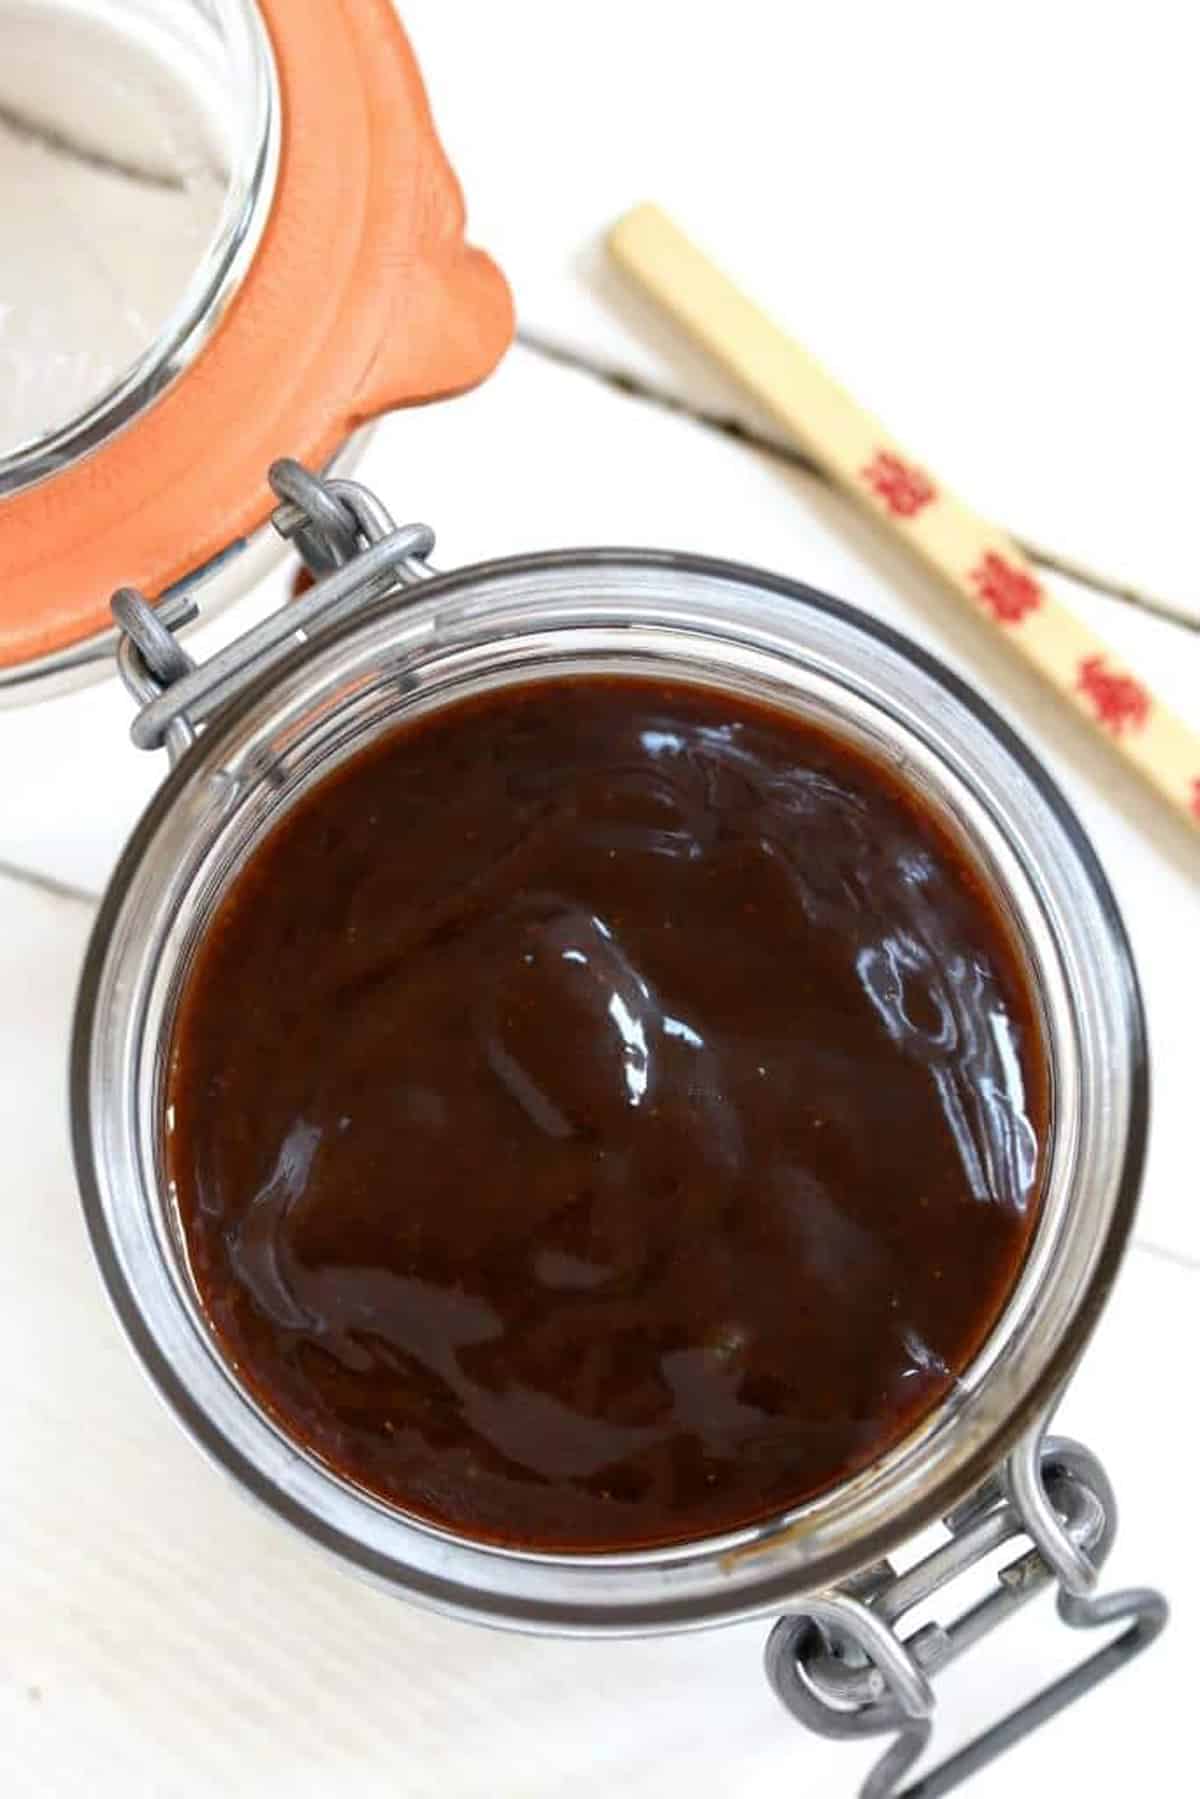 hoisin sauce recipe best authentic traditional without peanut butter fermented black beans chinese